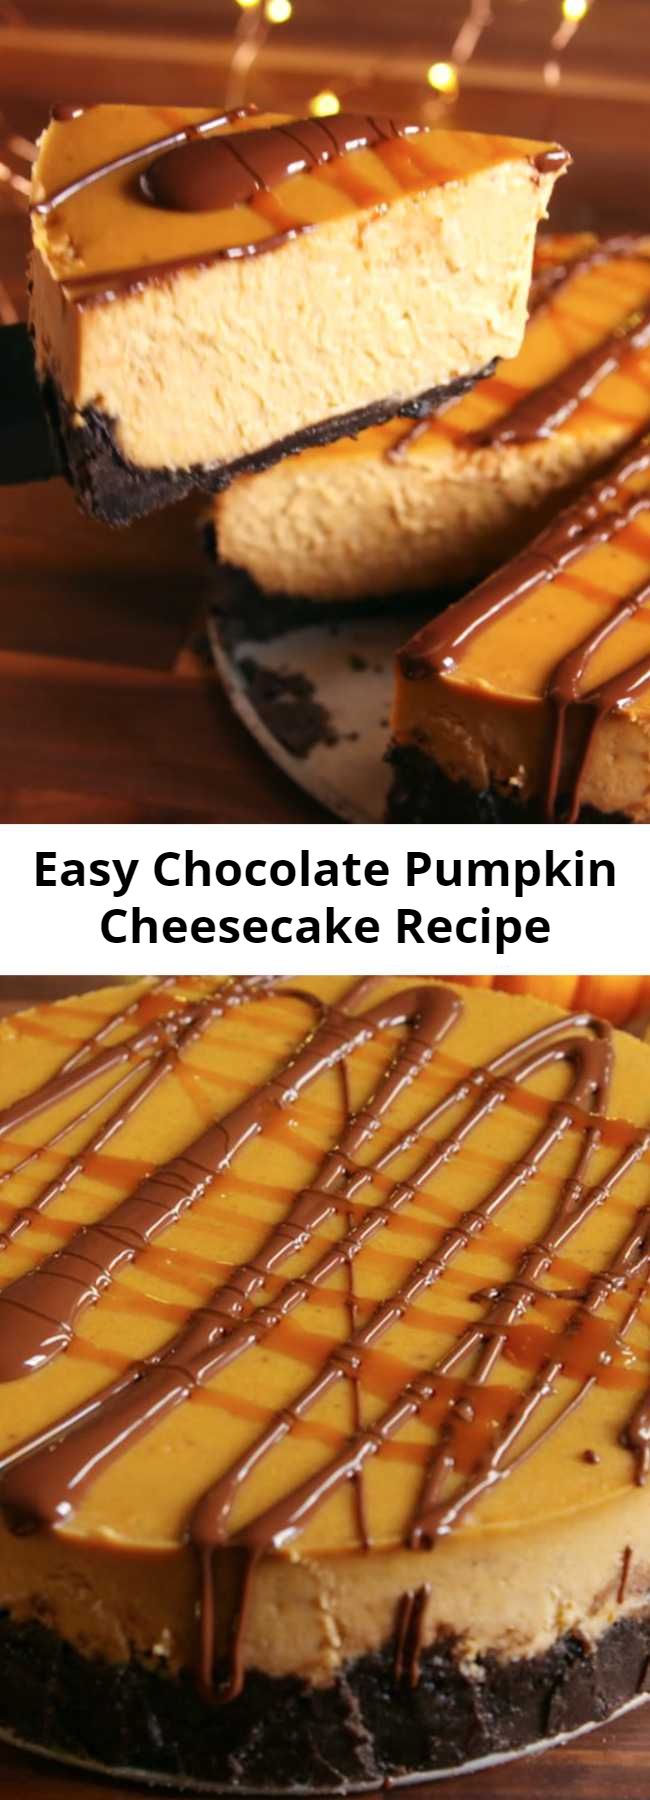 Easy Chocolate Pumpkin Cheesecake Recipe - Looking for an easy pumpkin dessert to make this Thanksgiving? This creamy pumpkin cheesecake with an Oreo crust is sure to impress. And we've got tons of cheesecake baking tips—like how to prevent your cheesecake from cracking—to set you up for success. #recipe #easy #easyrecipes #chocolate #pumpkin #cake #cheese #cheesecake #baking #dessert #dessertrecipes #fall #chocolaterecipes